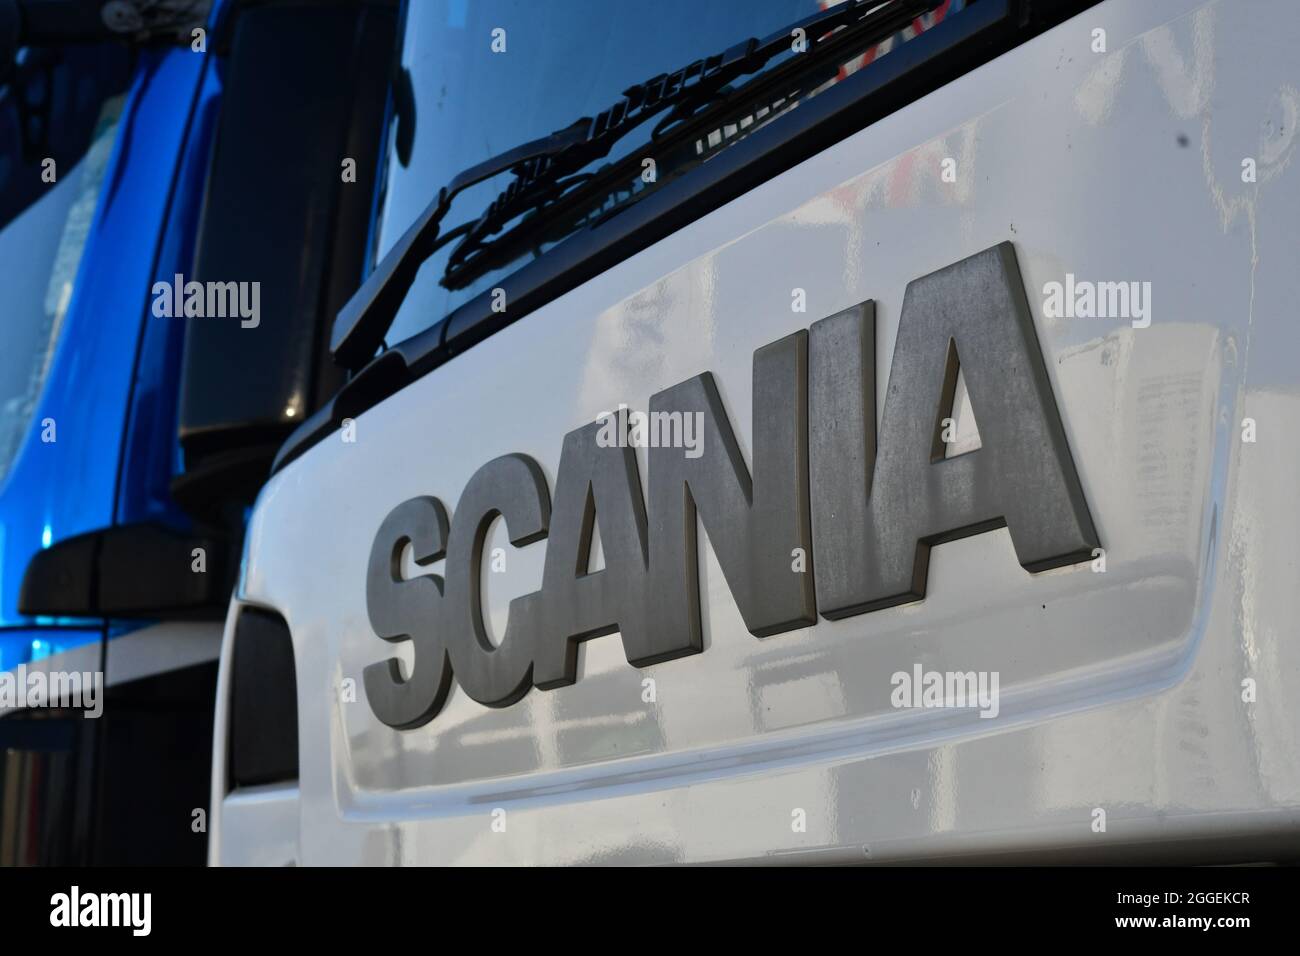 The front of a reflective white Scania Lorry Stock Photo